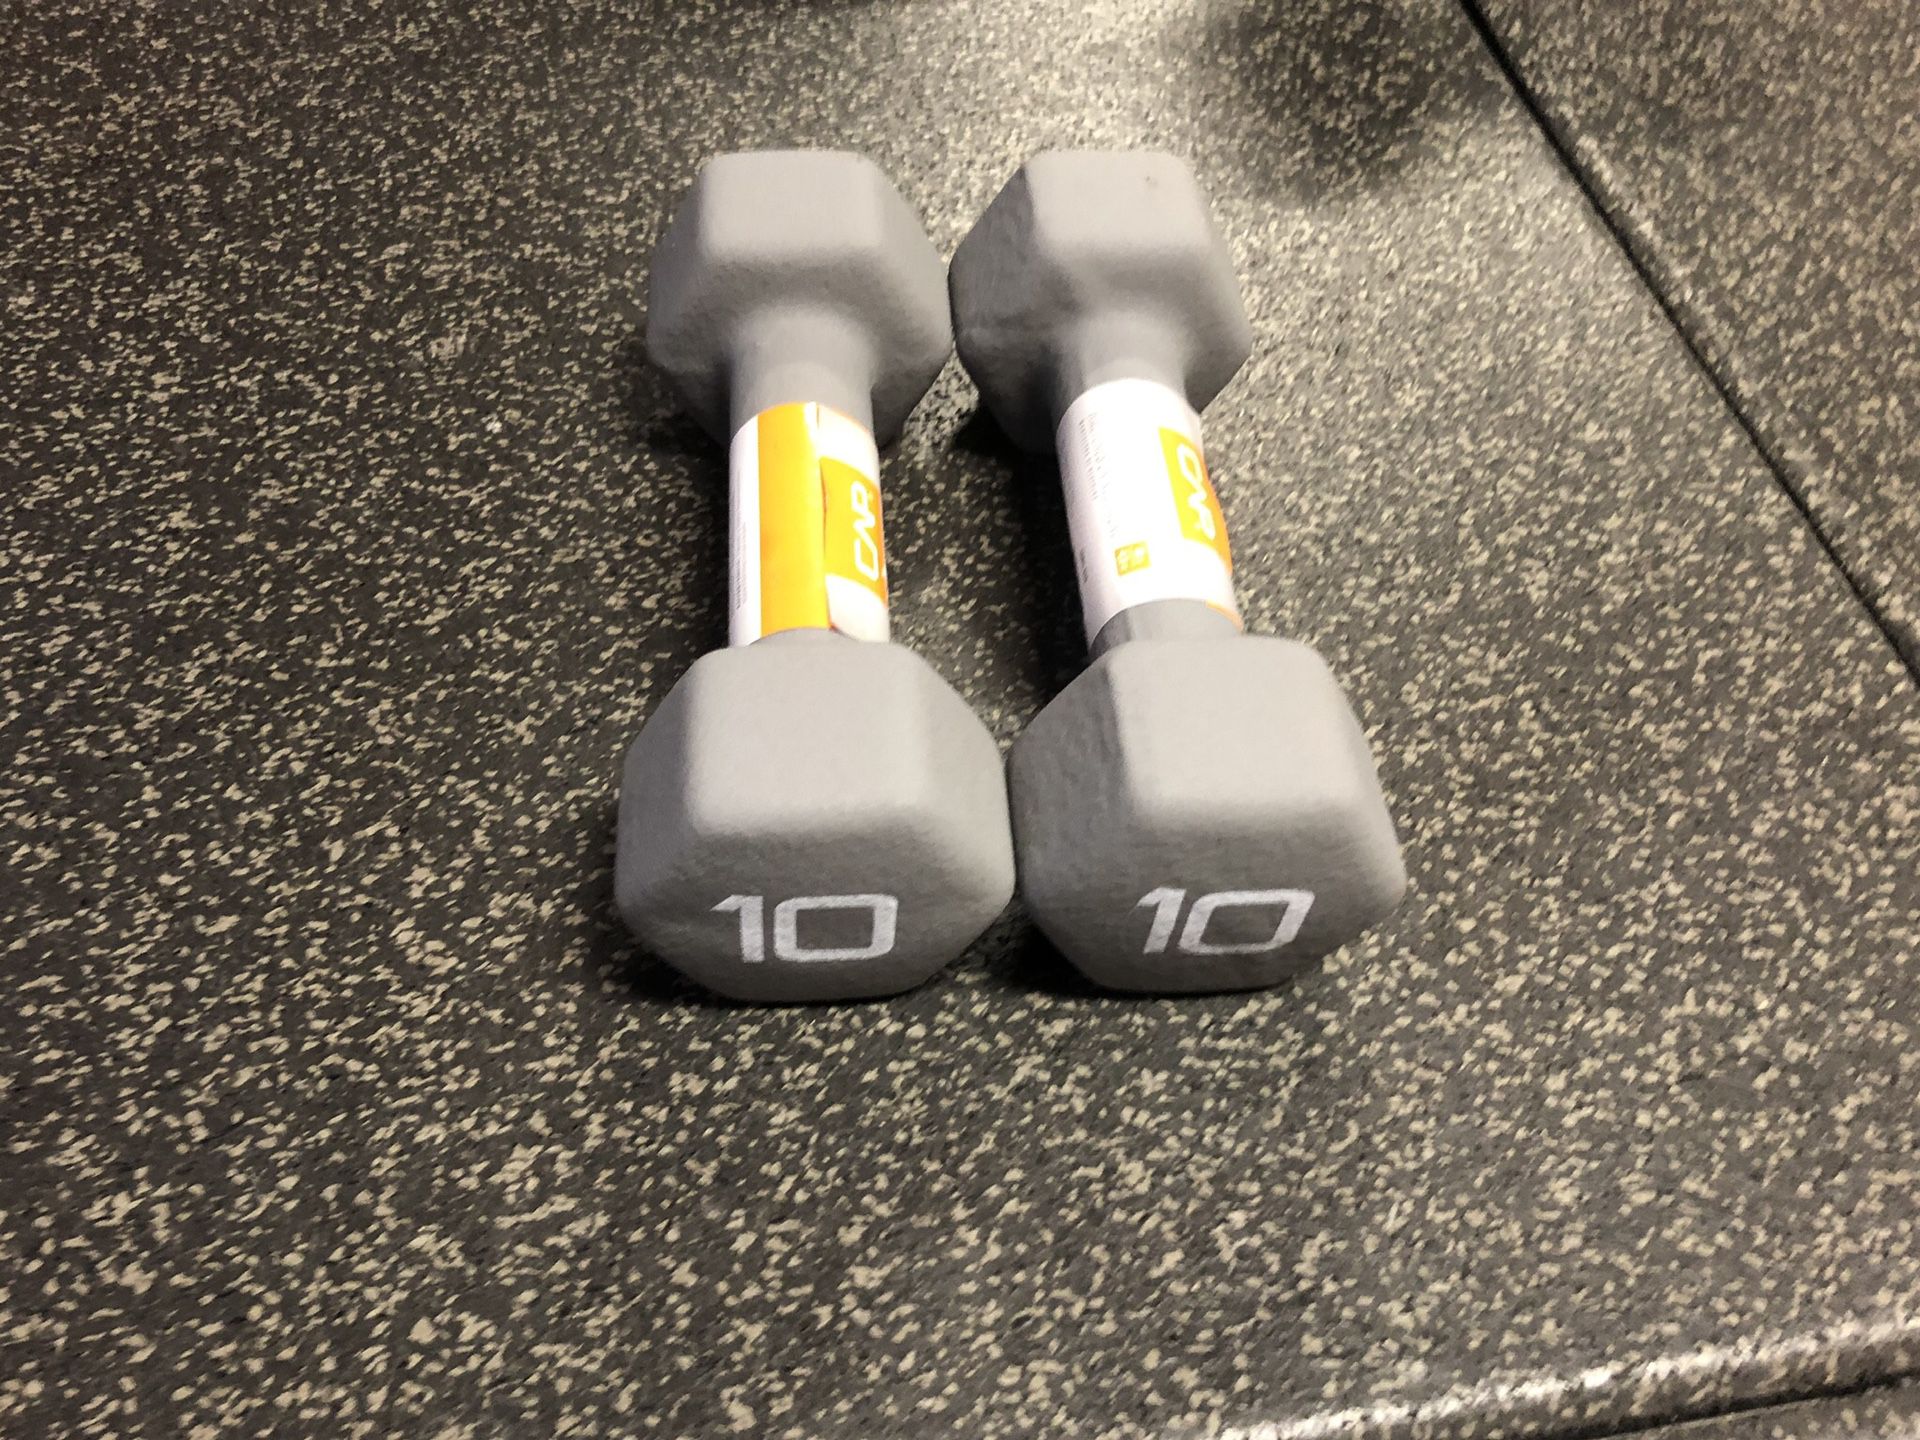 Dumbbells 💪🏻 Weights Set, 2x 10 lbs -Brand New!